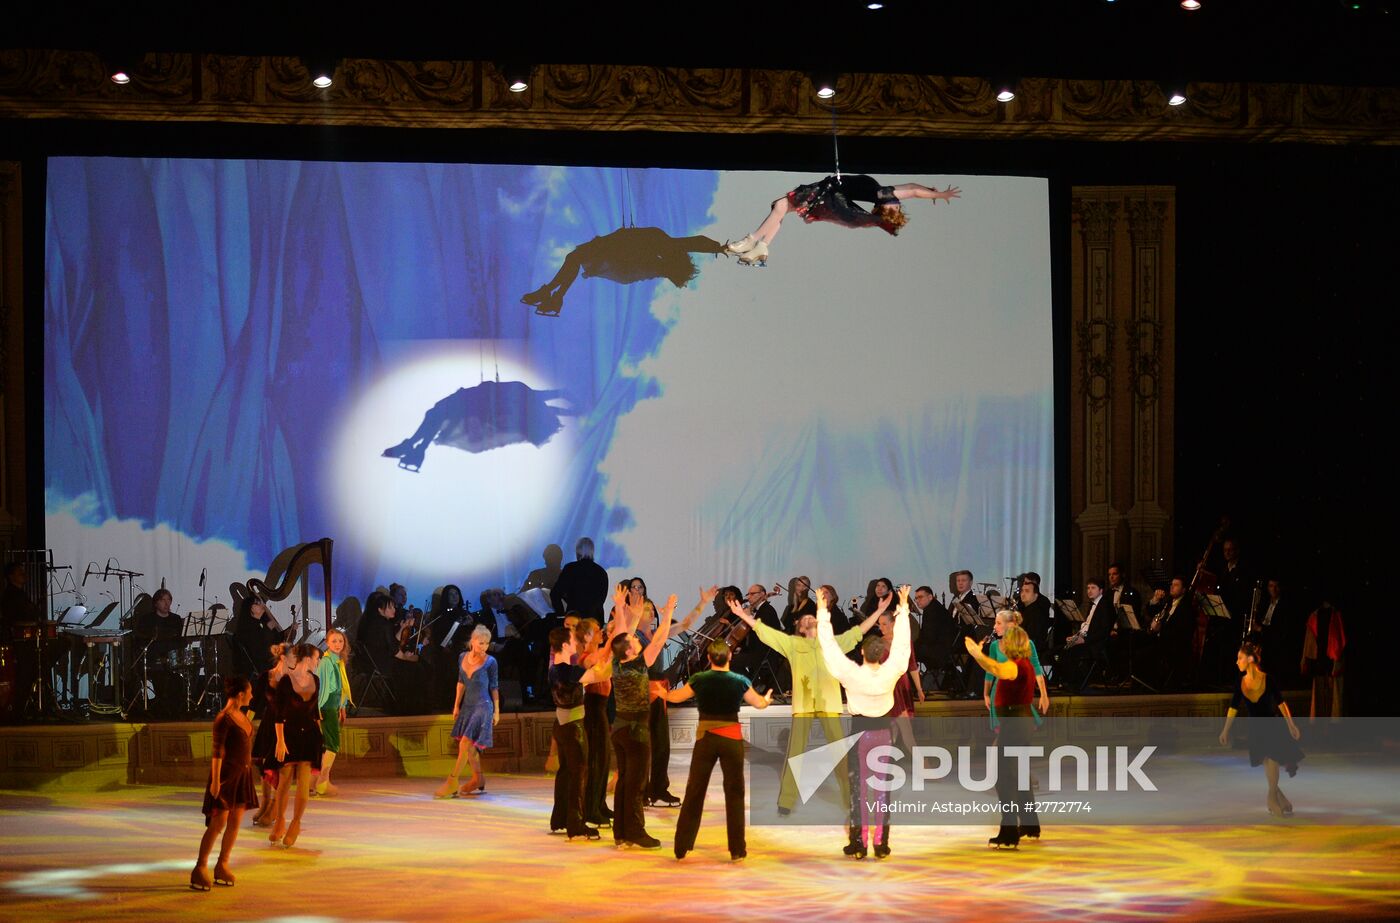 Theater of Ice Miniatures performs anniversary program "We are 30 Years Old"